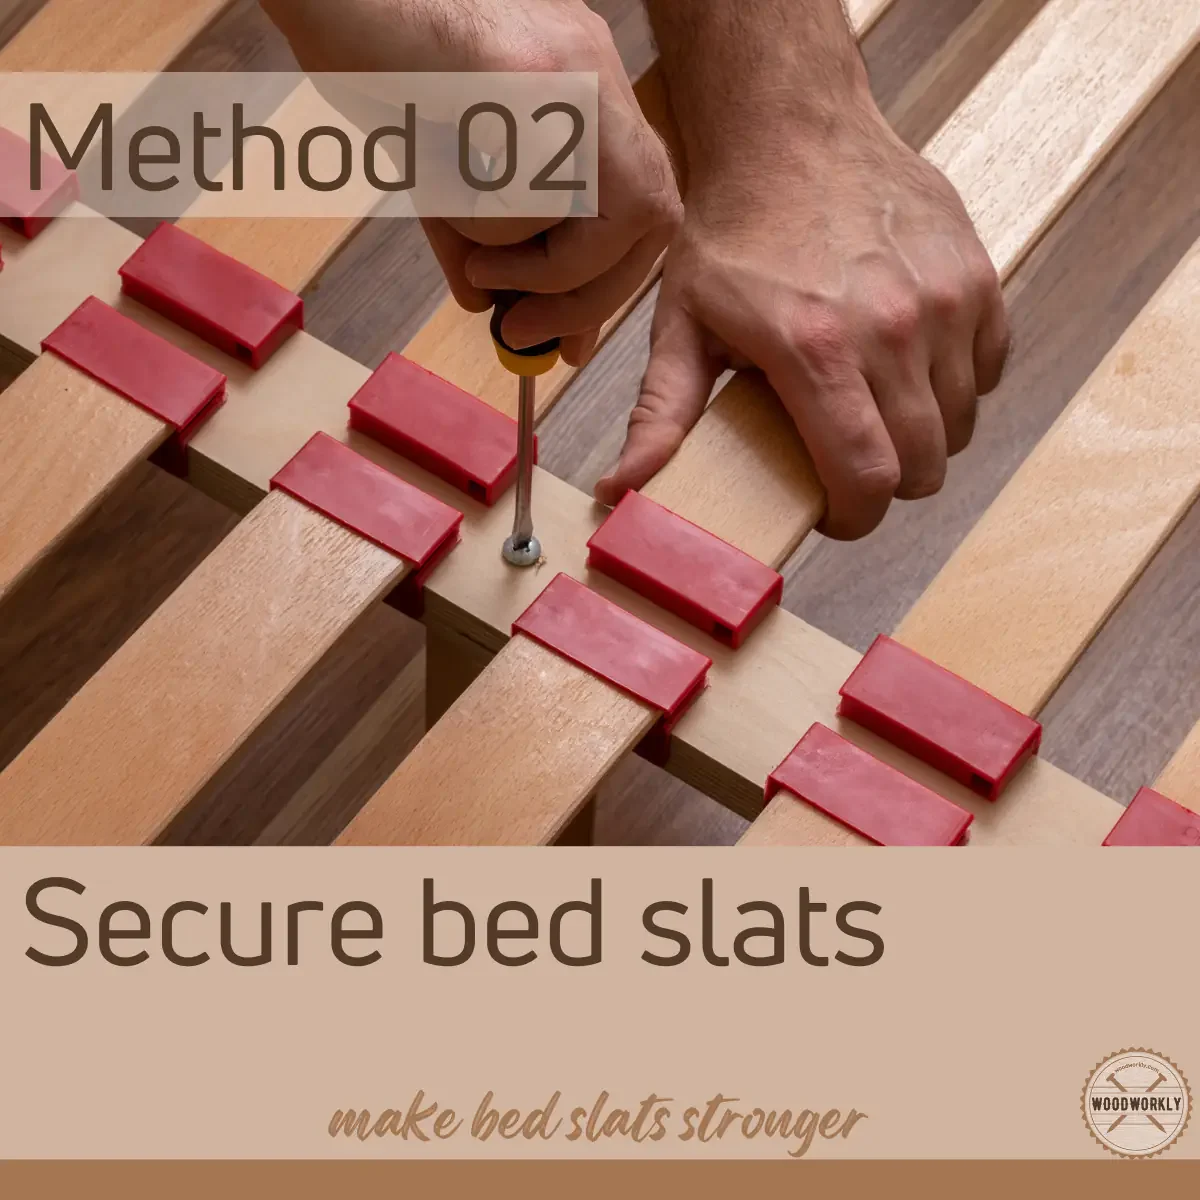 secure the slats to the bed frame to make slats stronger